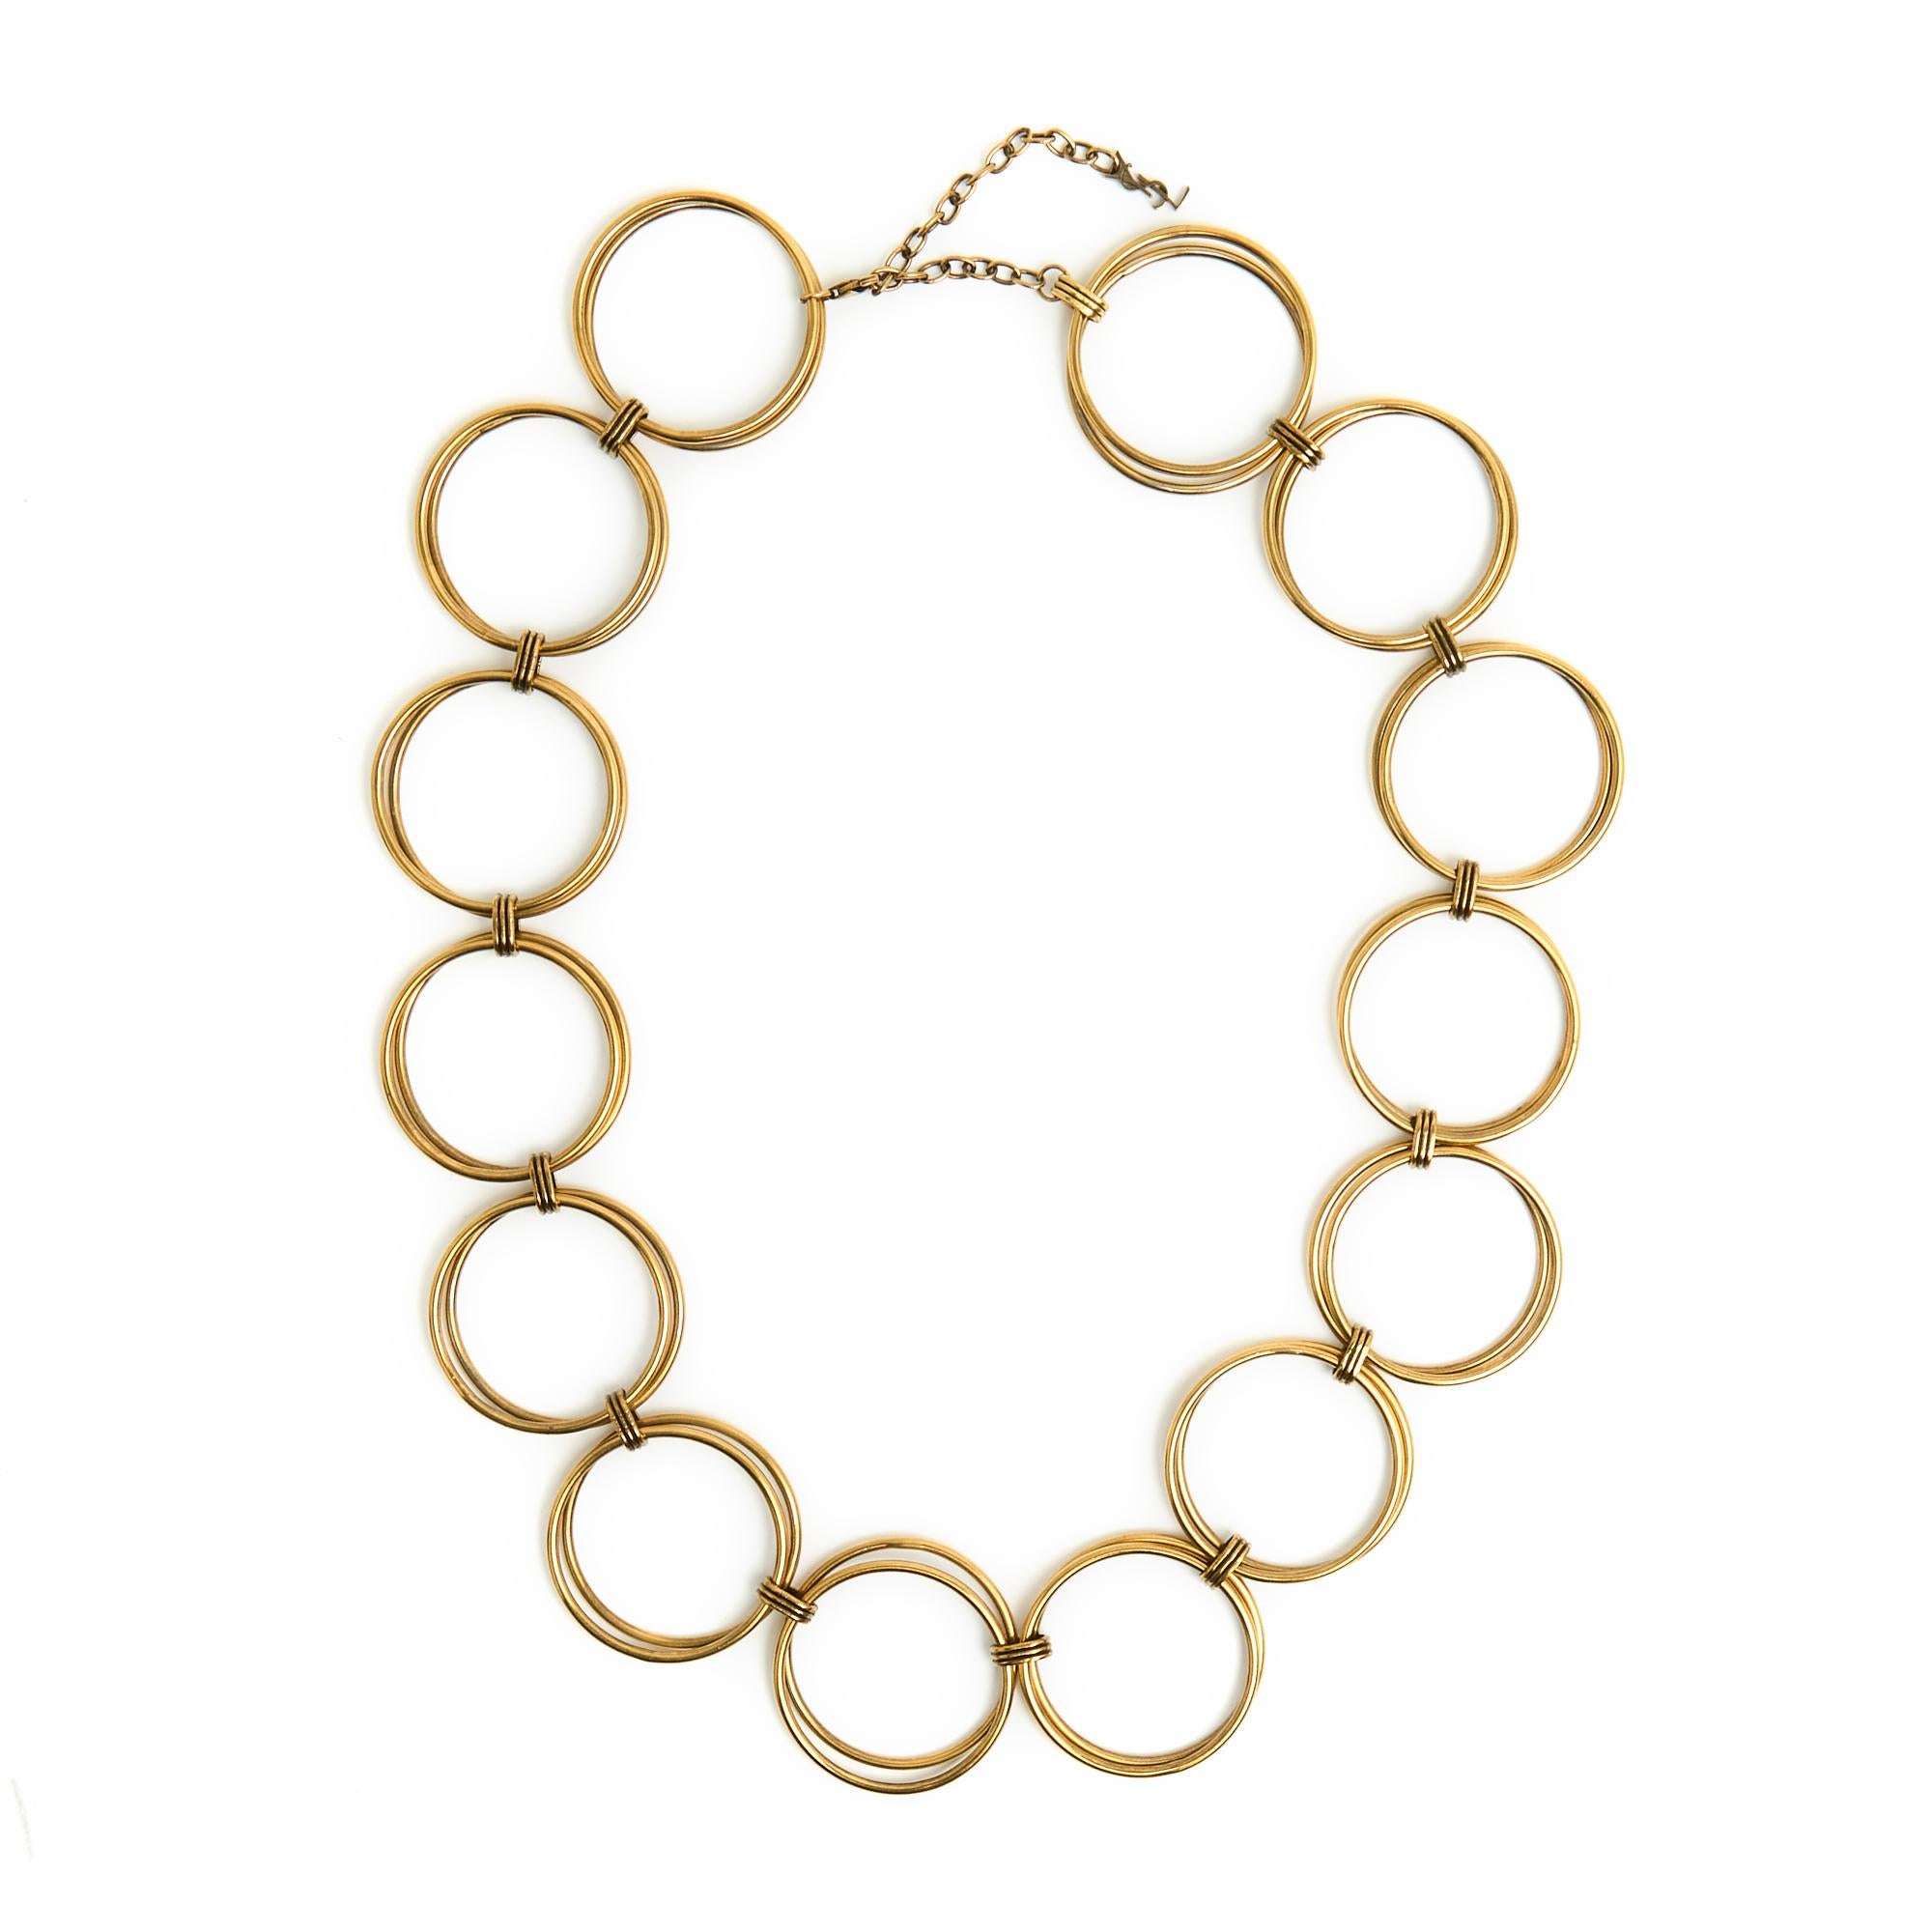 Saint Laurent necklace composed of large round lined rings, carabiner closure on a chain and a YSL logo. Total length of the necklace 68 cm, closure from 59 to 65 cm, diameter of the rings 3.5 cm. The necklace is in very good condition, minimalist,